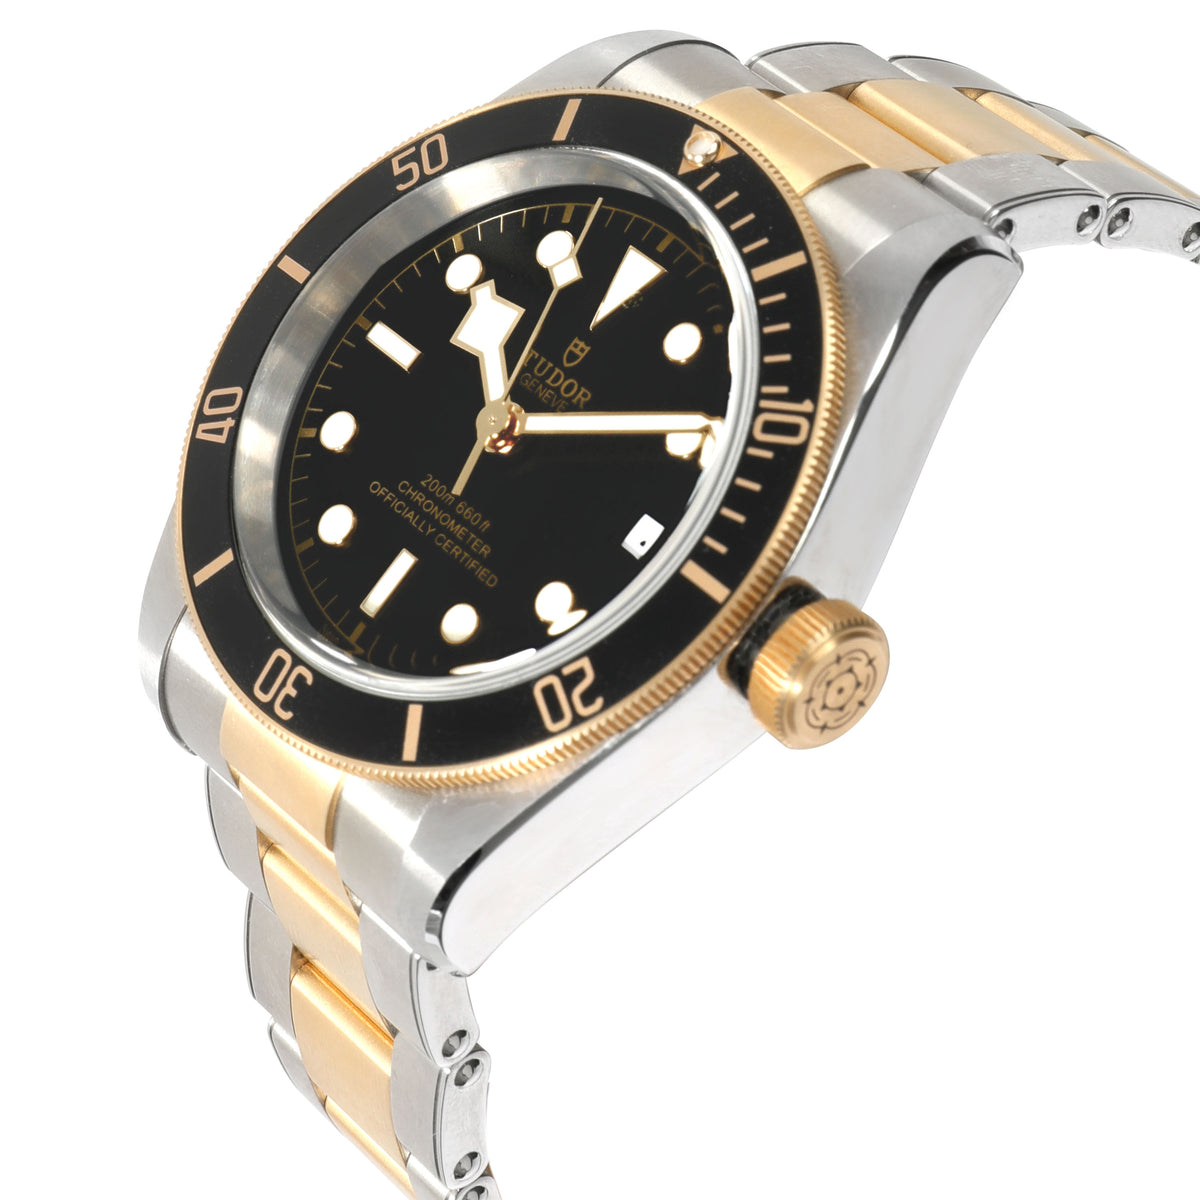 Tudor Black Bay 79733 Men's Watch in 18kt Stainless Steel/Yellow Gold